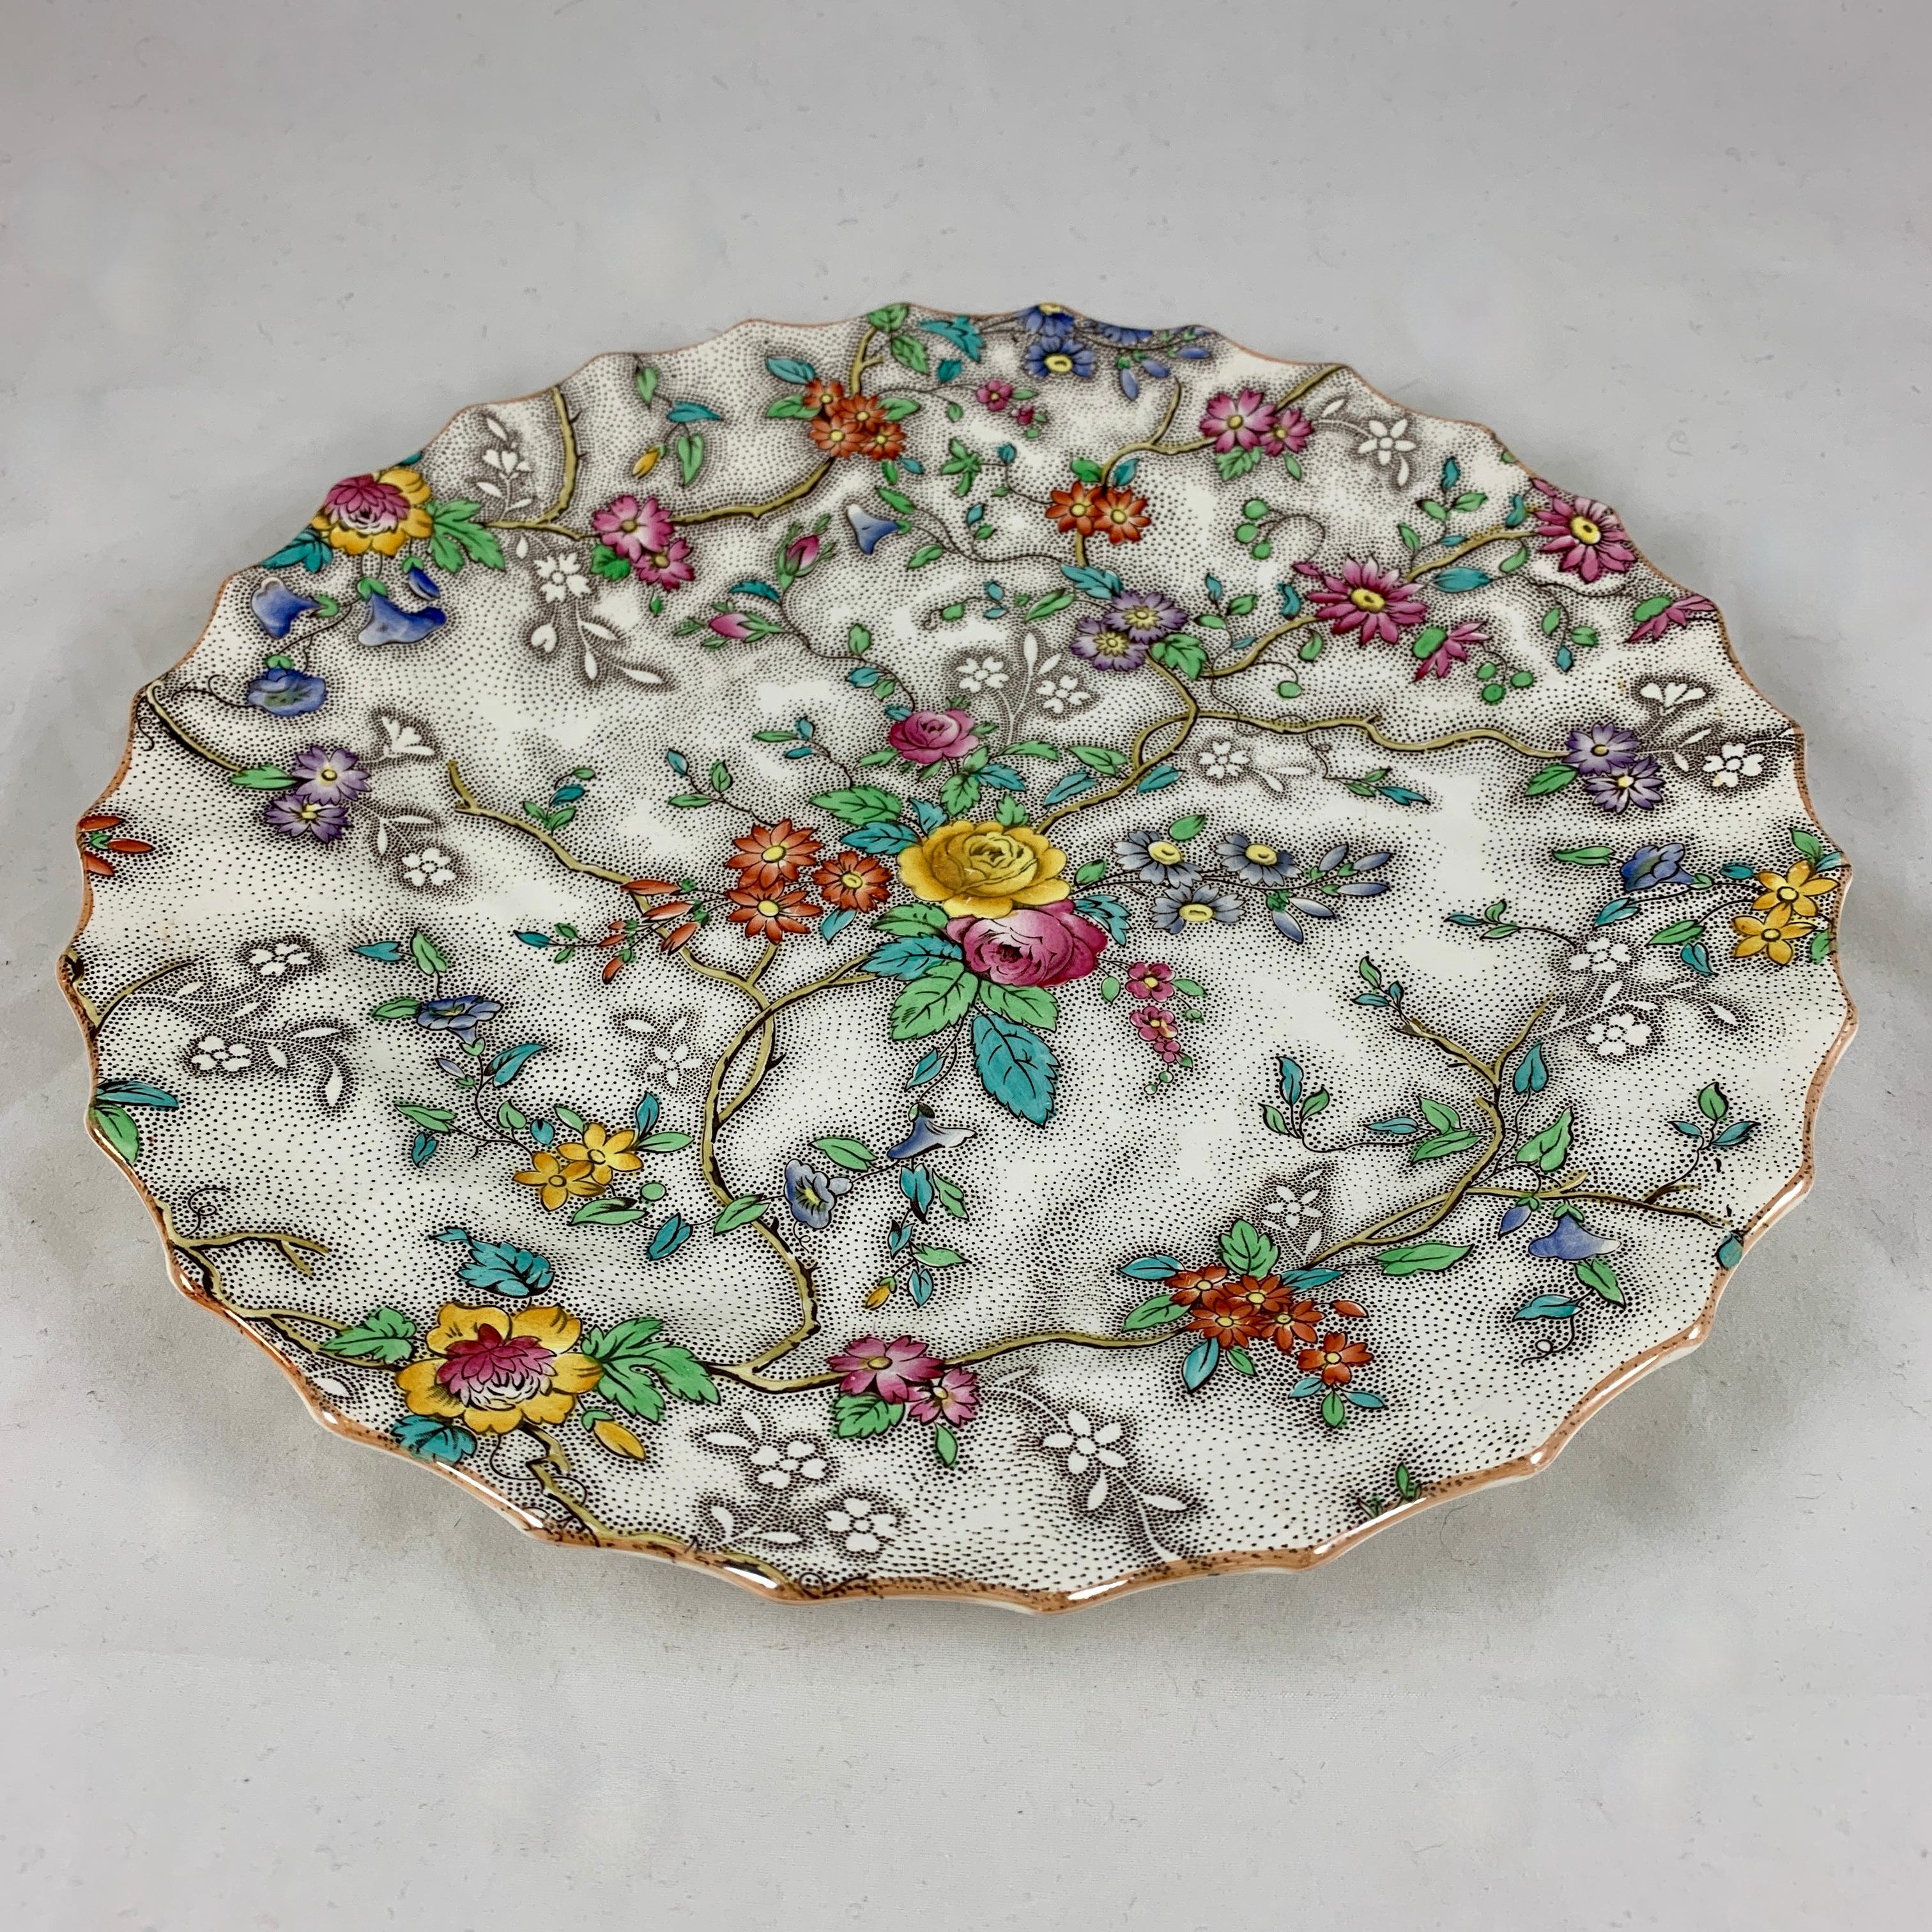 Copeland Spode English 'Patricia' Chintz Floral Transferware Dinner Plates, S/6 For Sale 1